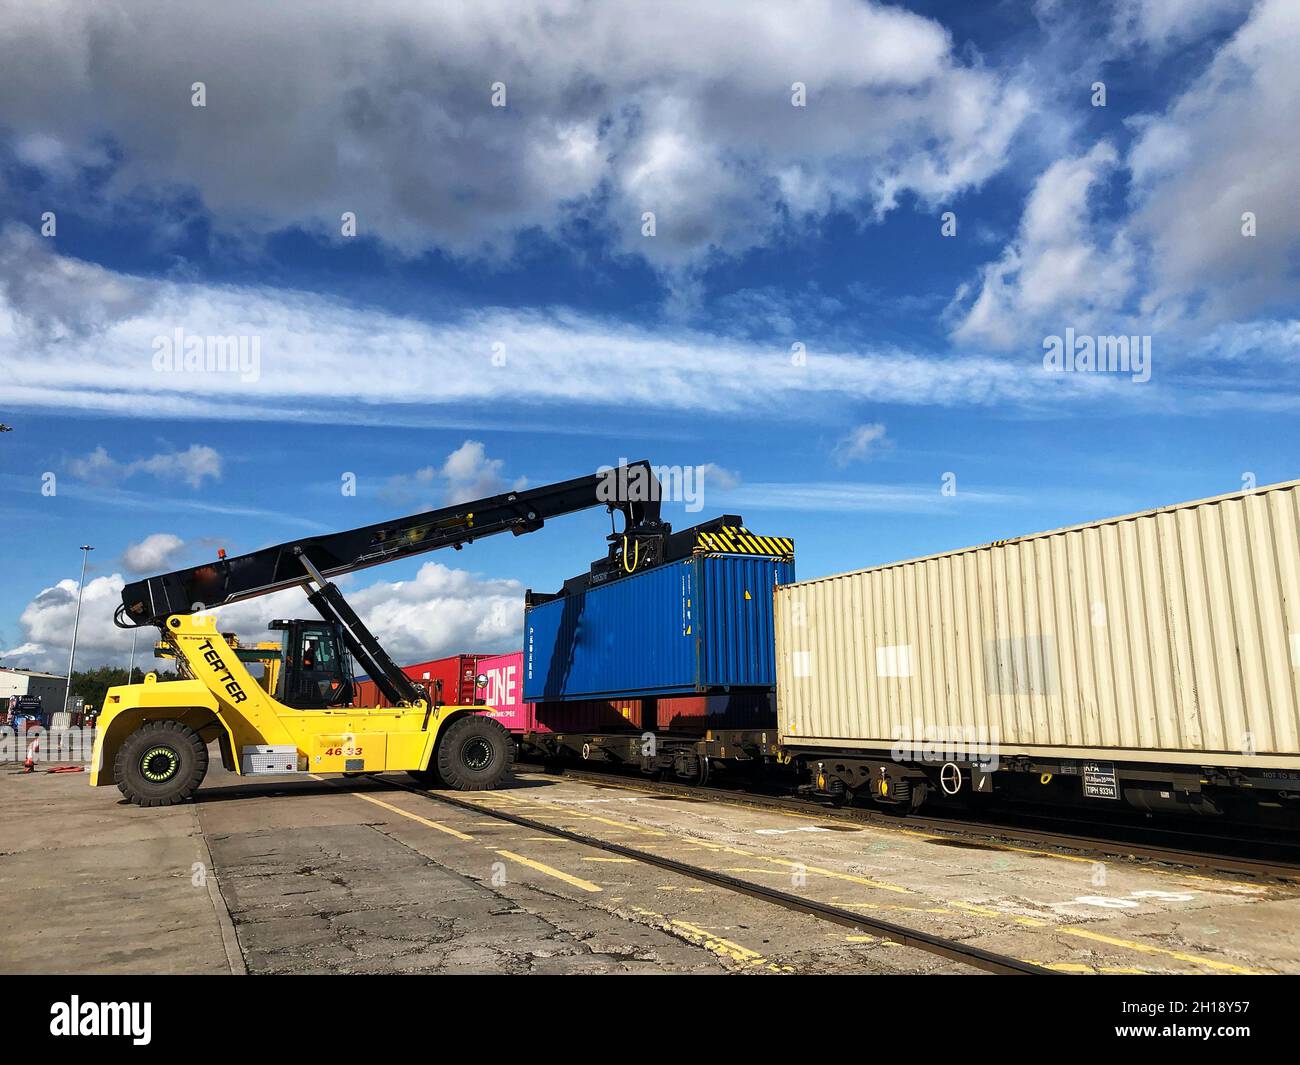 A heavy lifting crane machine loading a shipping container onto a freight train at a commercial terminal port or dock Stock Photo